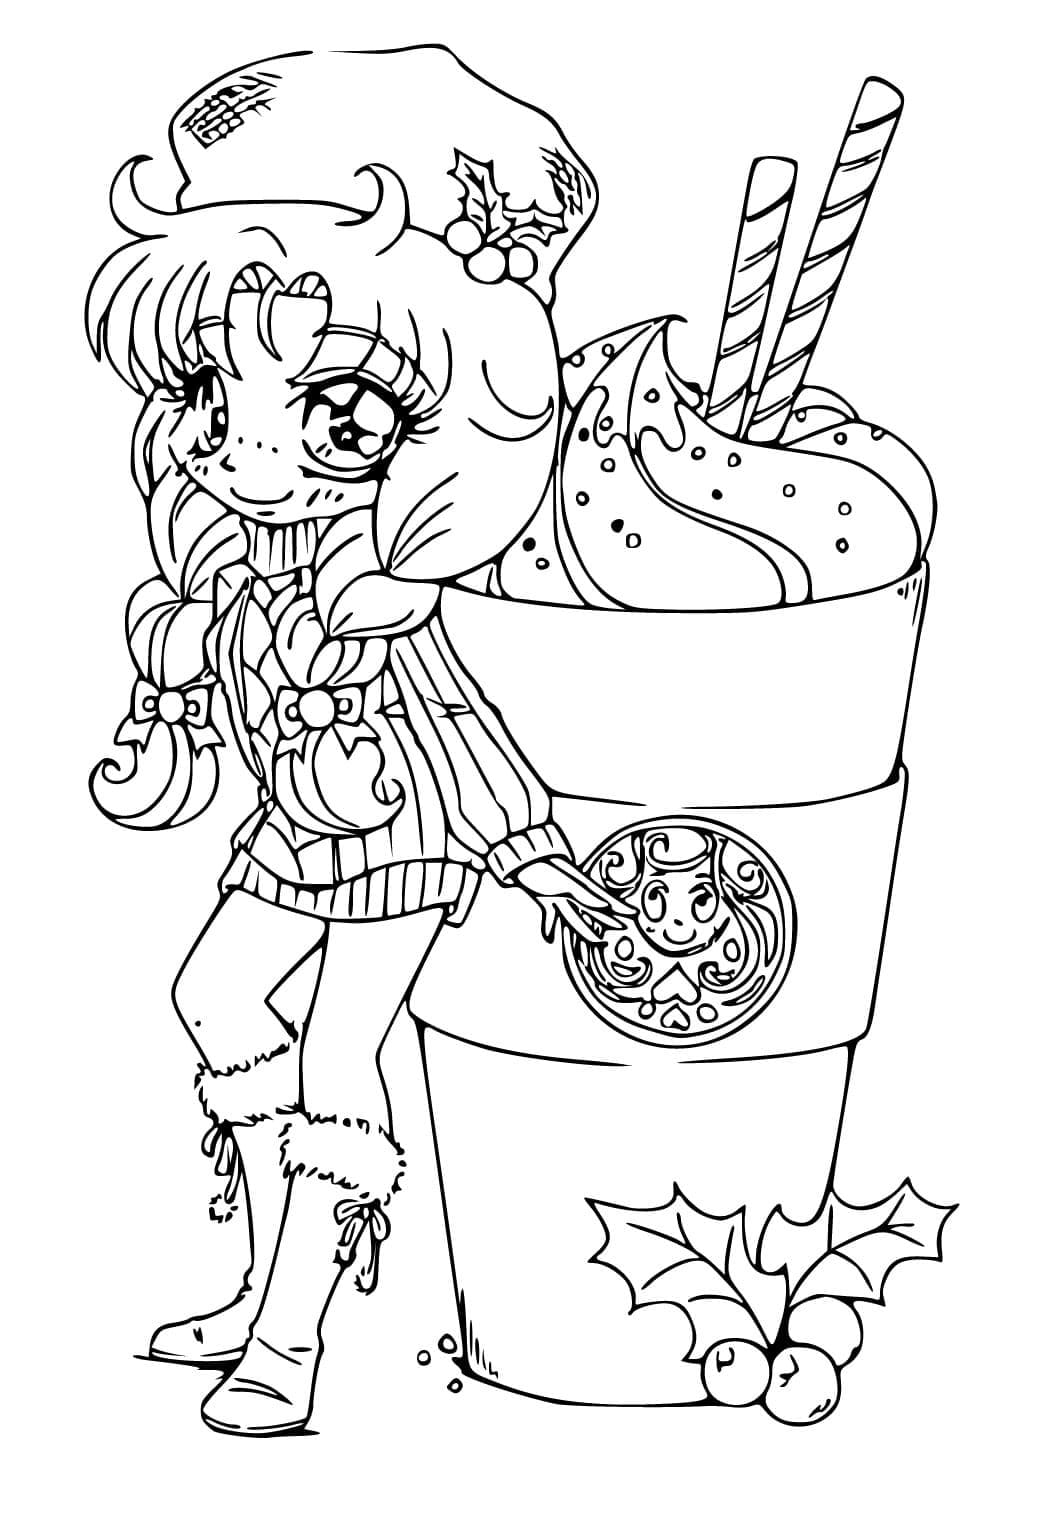 Fille et Starbucks coloring page